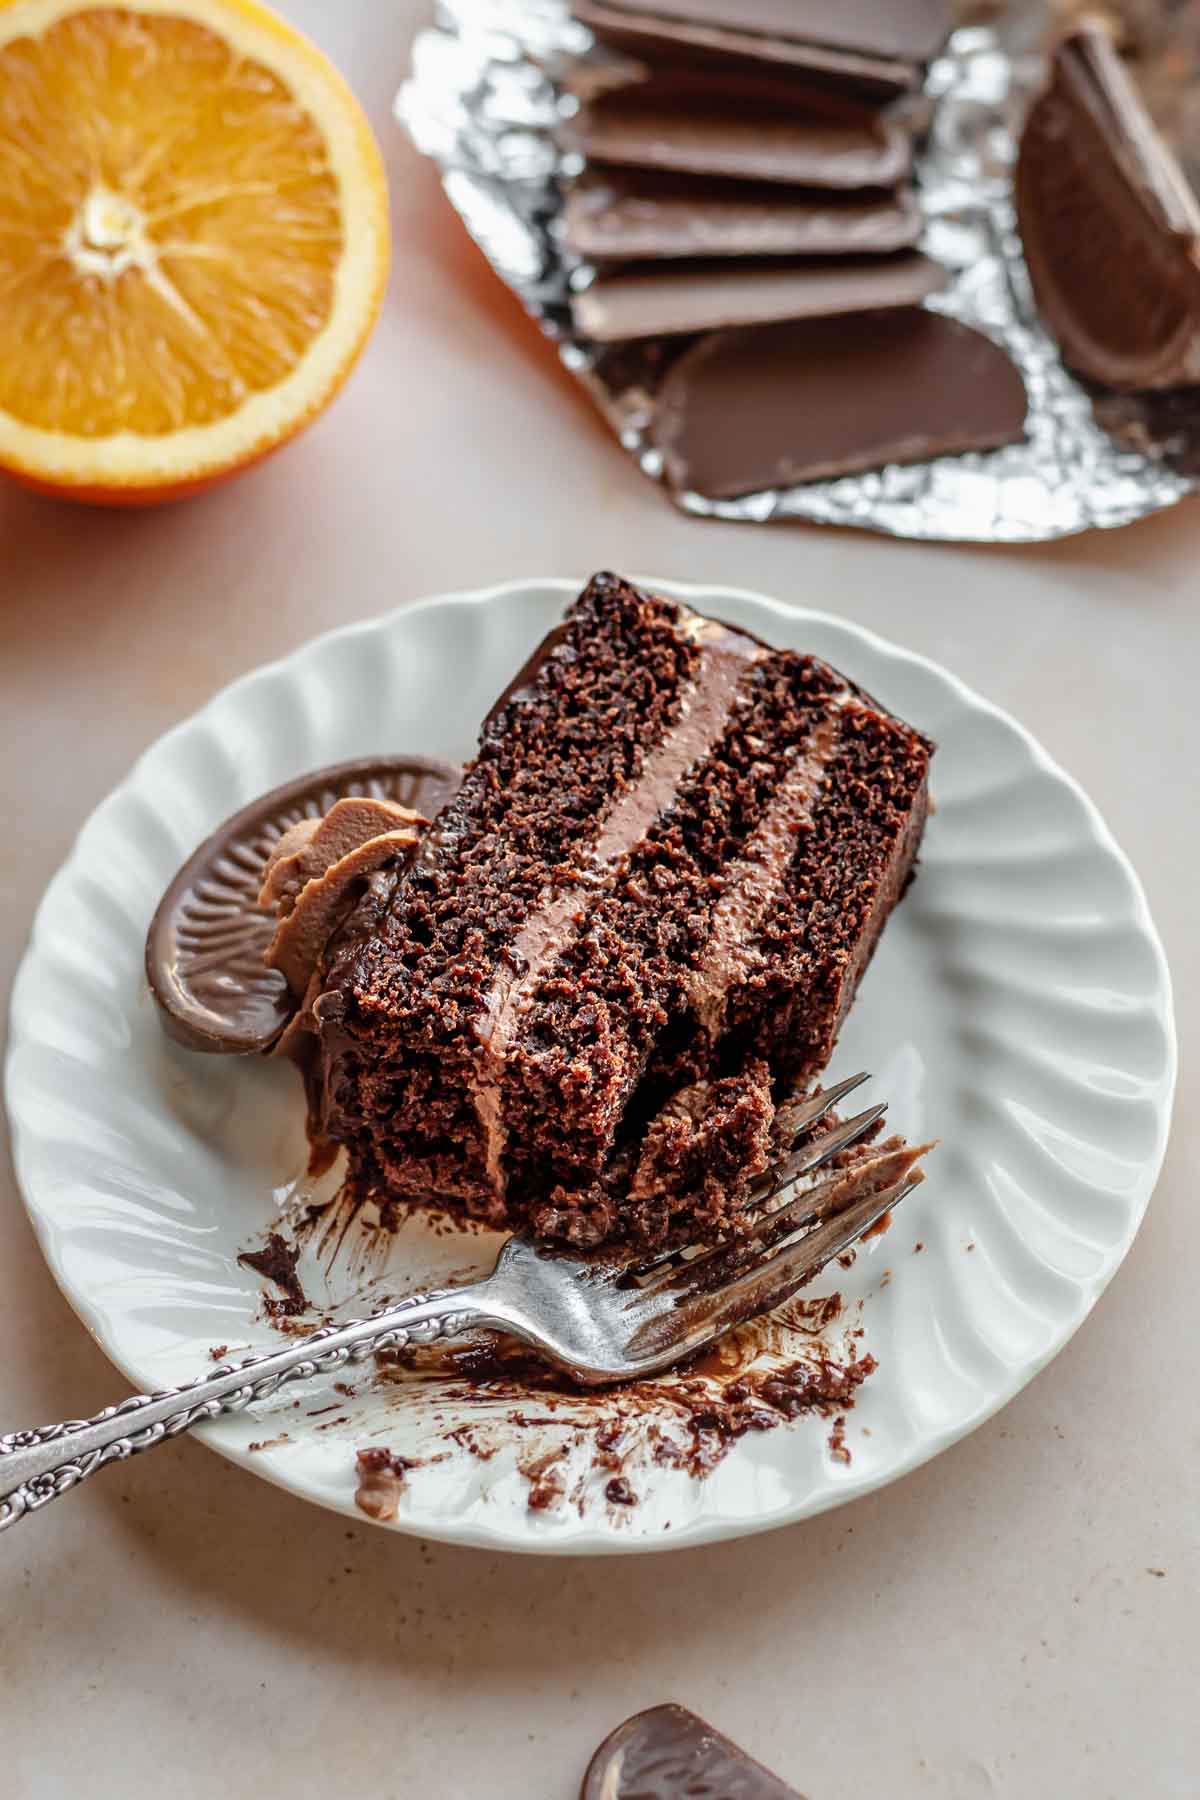 Slice of chocolate orange cake on a plate with a fork and bite removed.